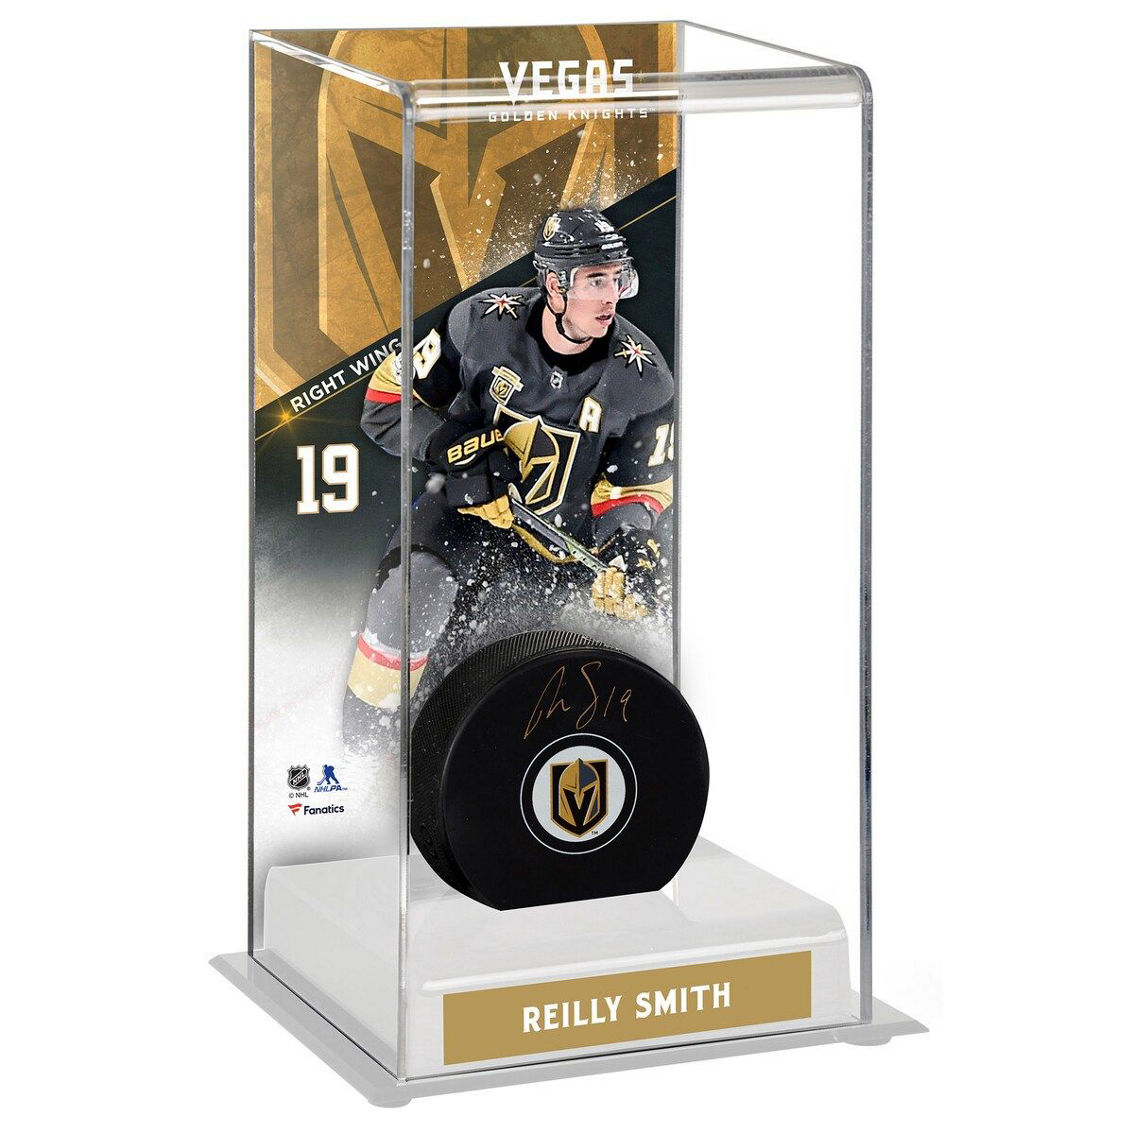 Fanatics Authentic Reilly Smith Vegas Golden Knights Autographed Puck with Deluxe Tall Hockey Puck Case - Image 2 of 2